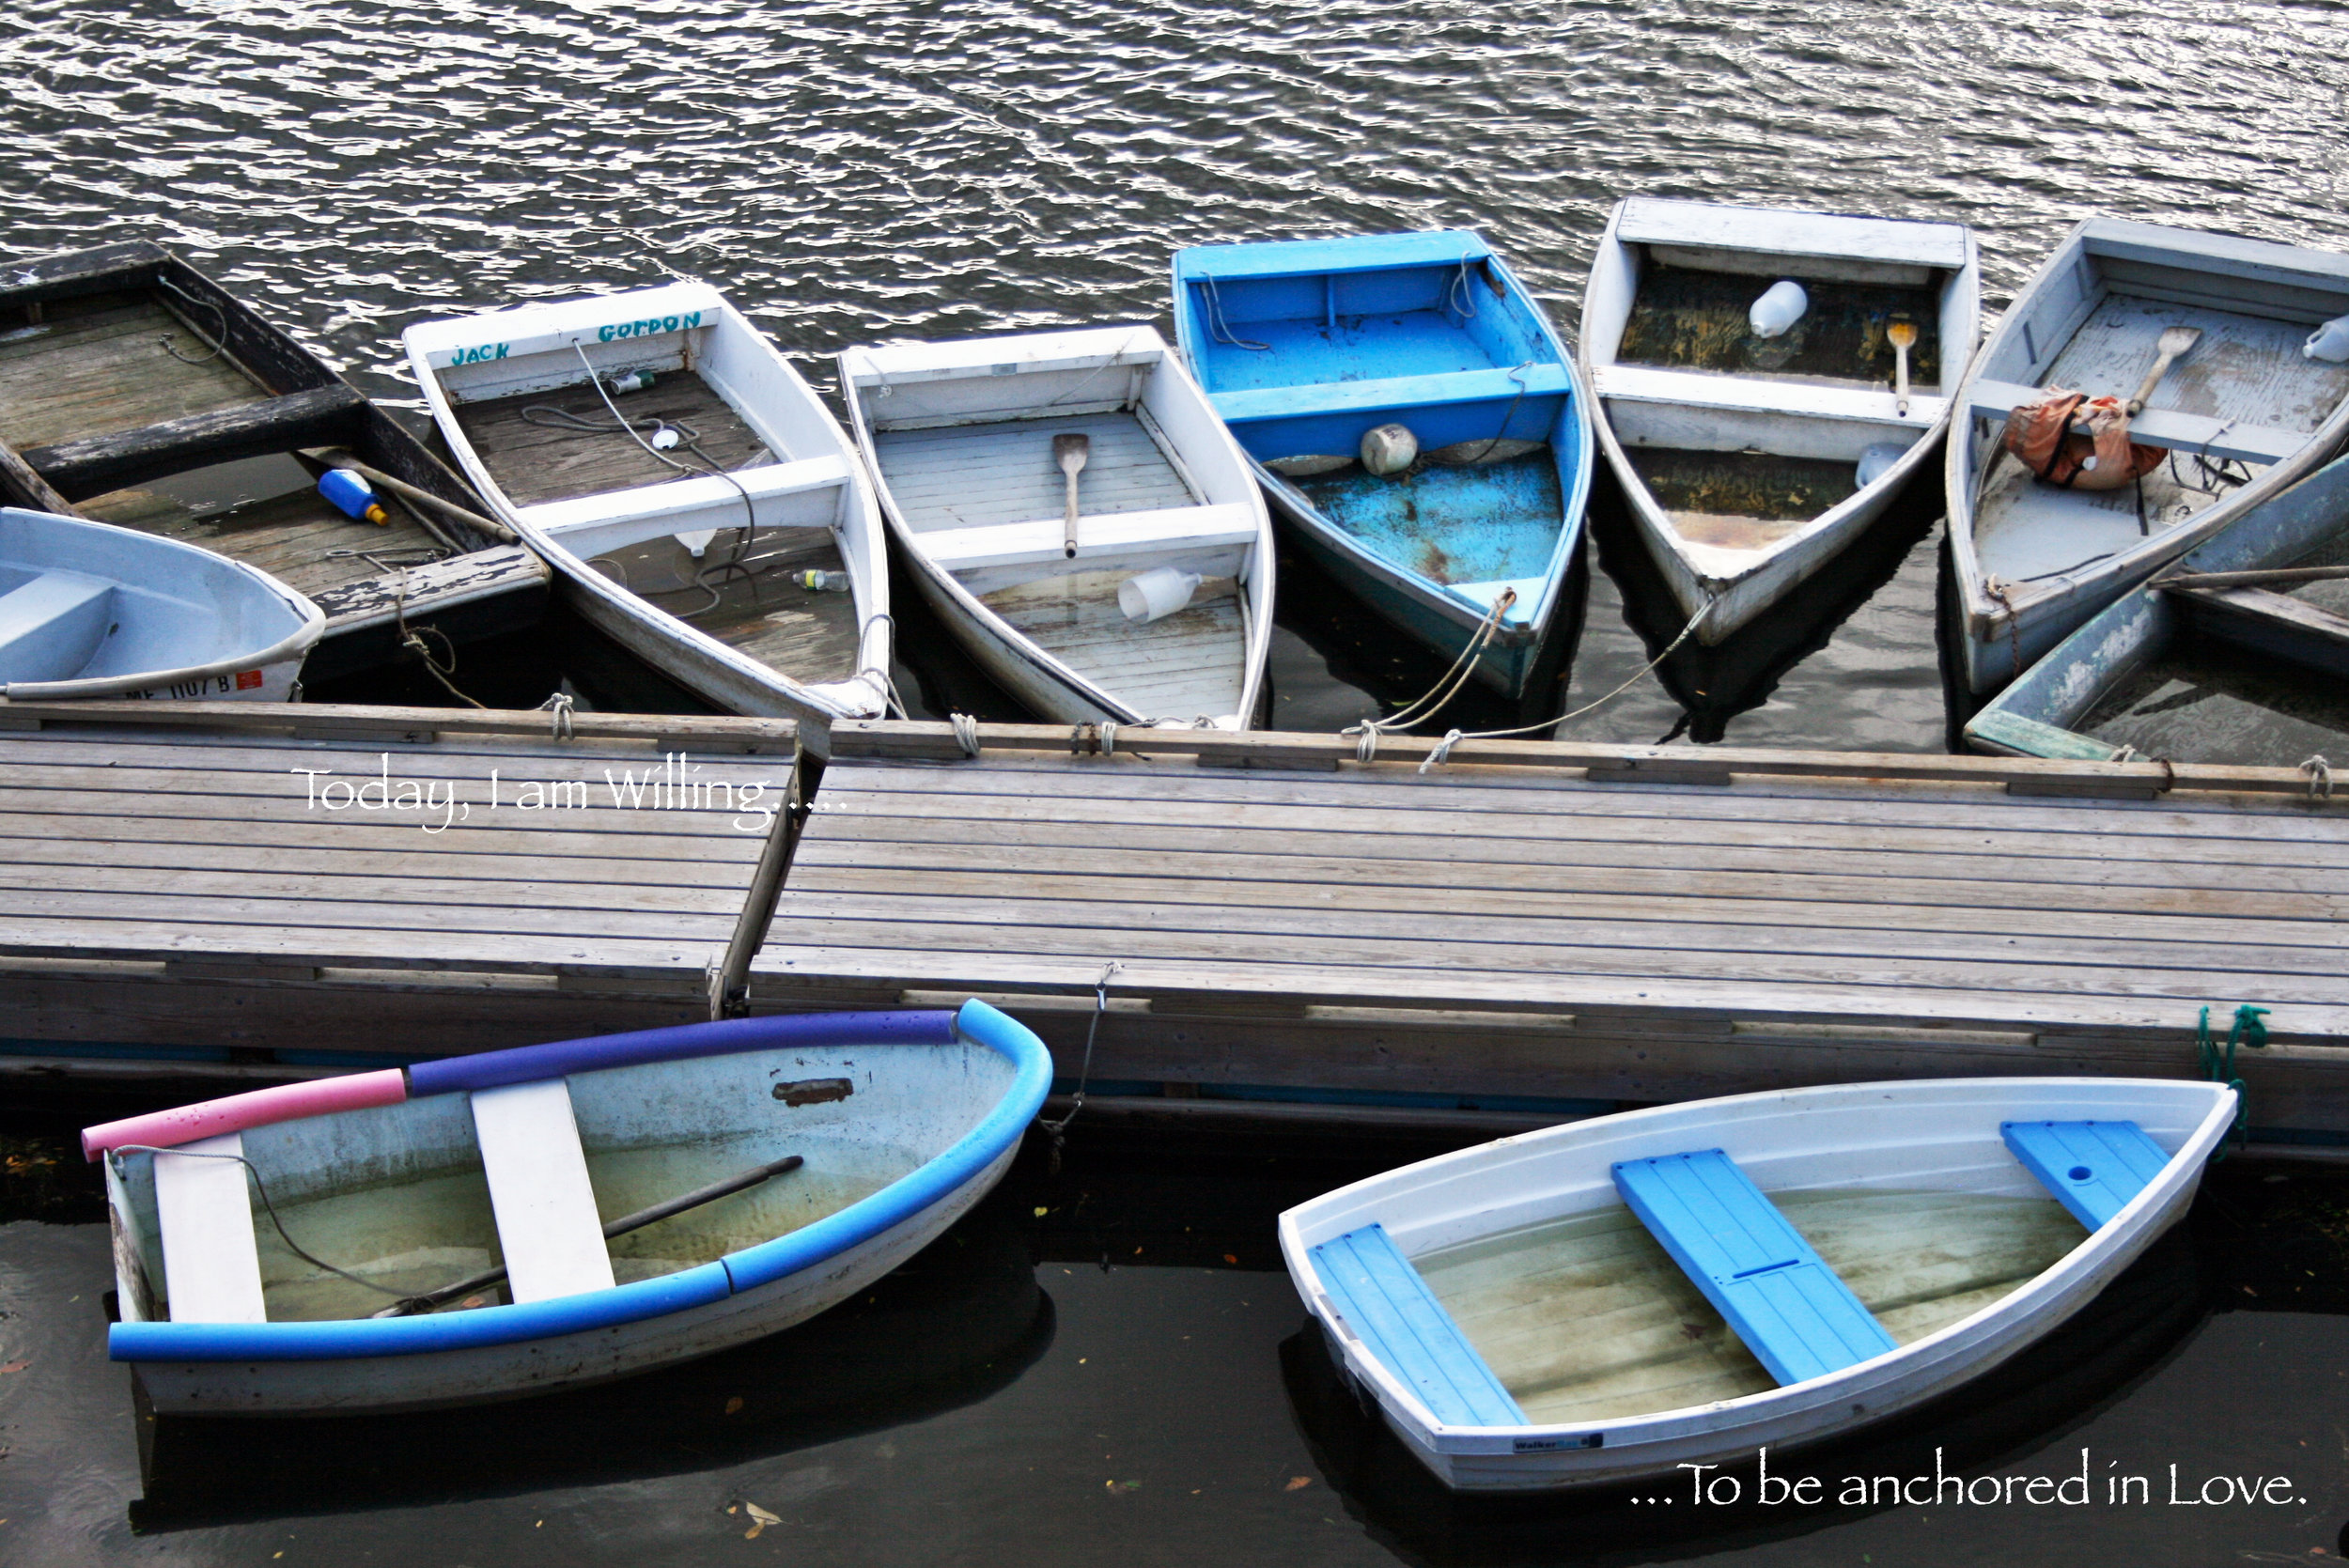 Boats in the cove_Anchored in Love.jpg